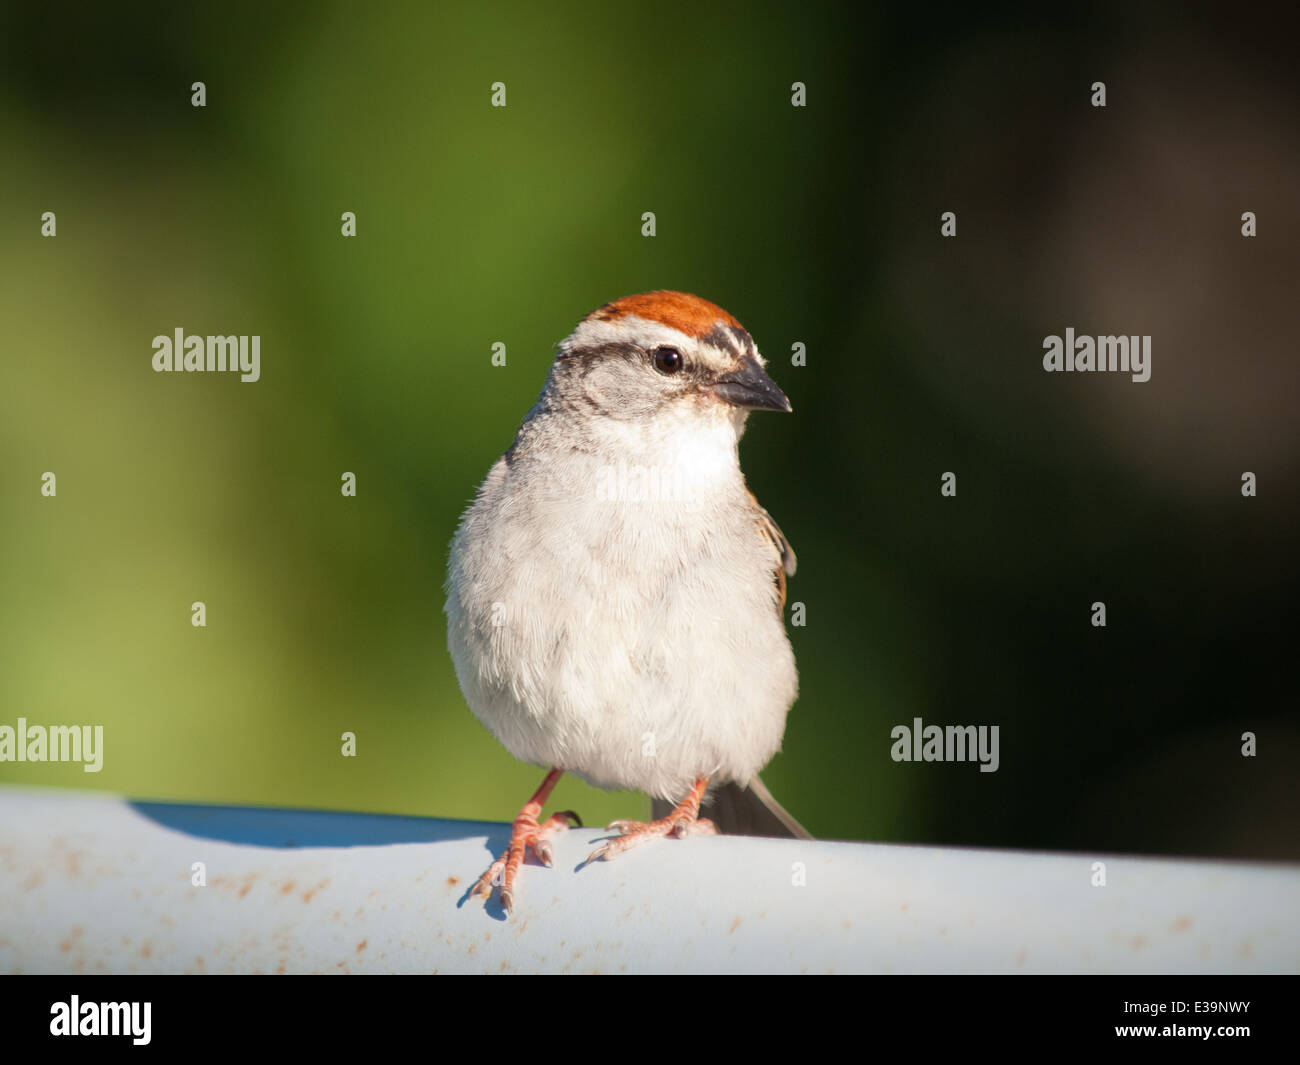 An adult Chipping Sparrow (Spizella passerina) in summer breeding plumage. Stock Photo